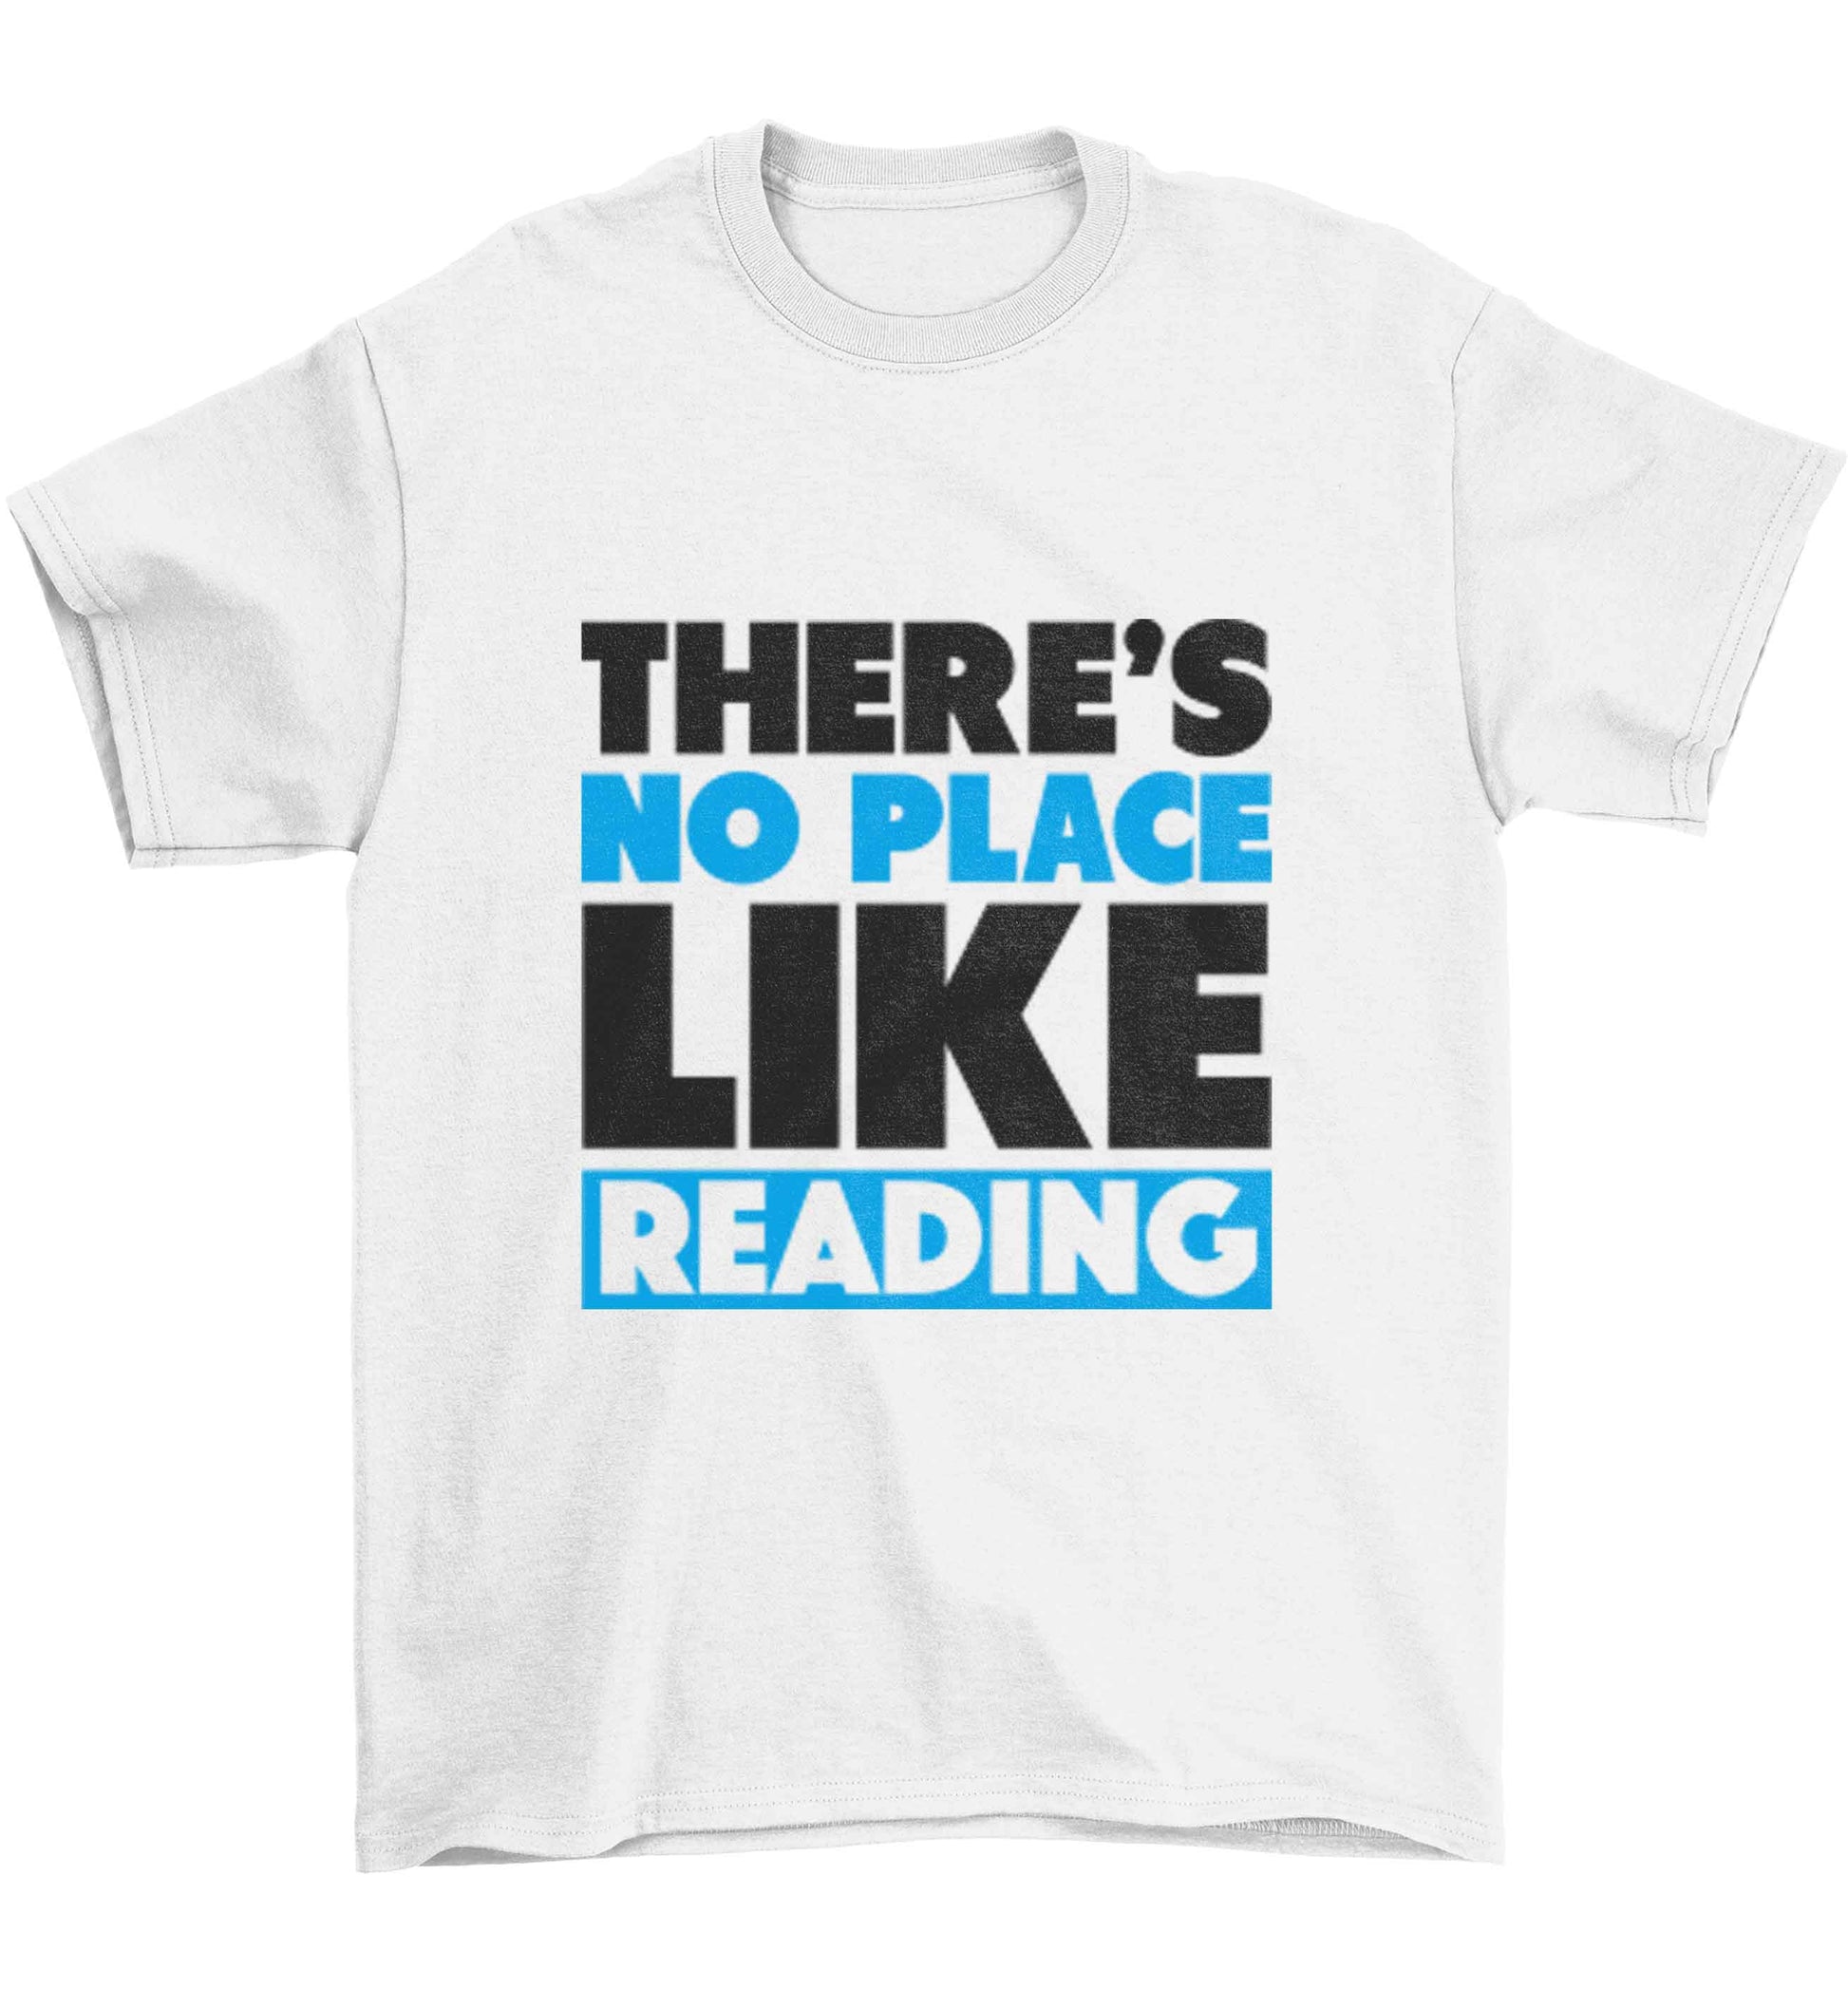 There's no place like ReadingChildren's white Tshirt 12-13 Years